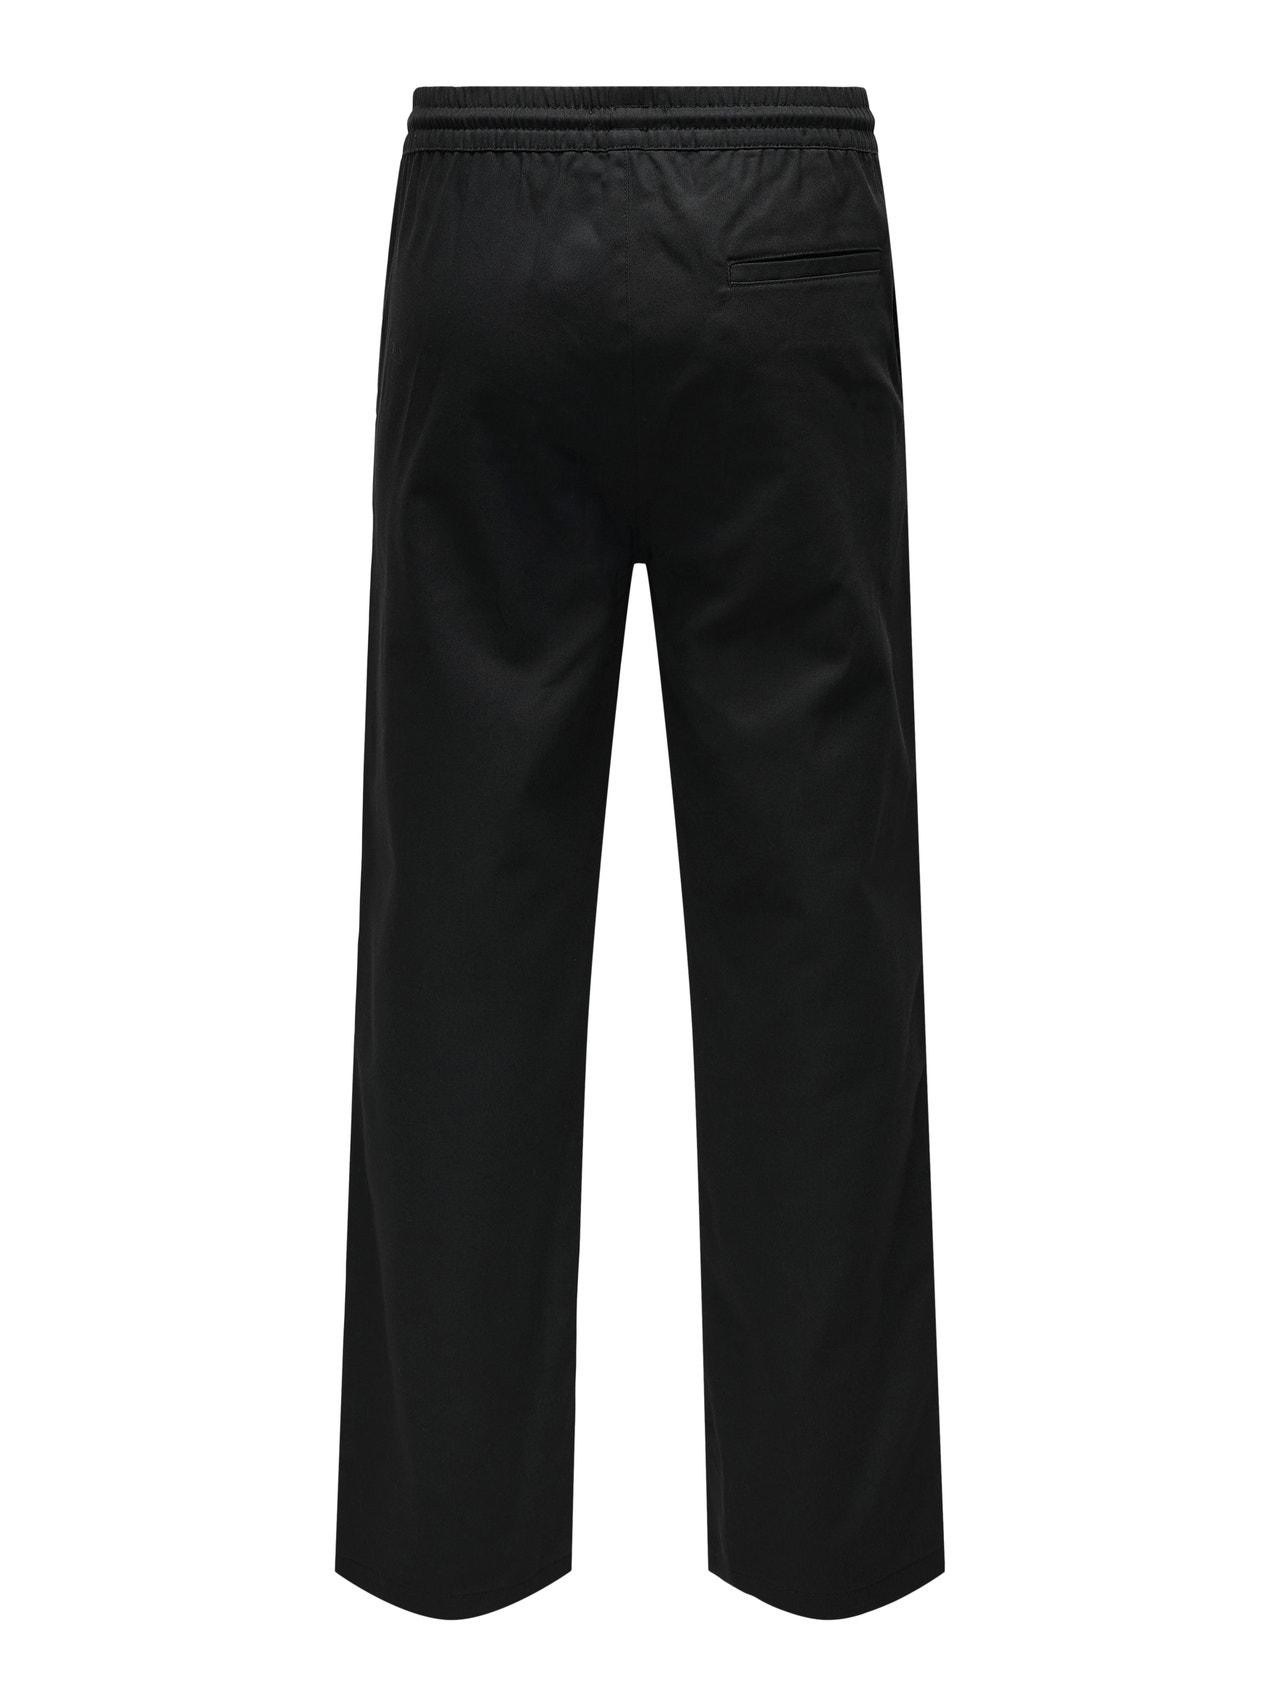 ONLY & SONS Loose Fit Trousers -Black - 22027416